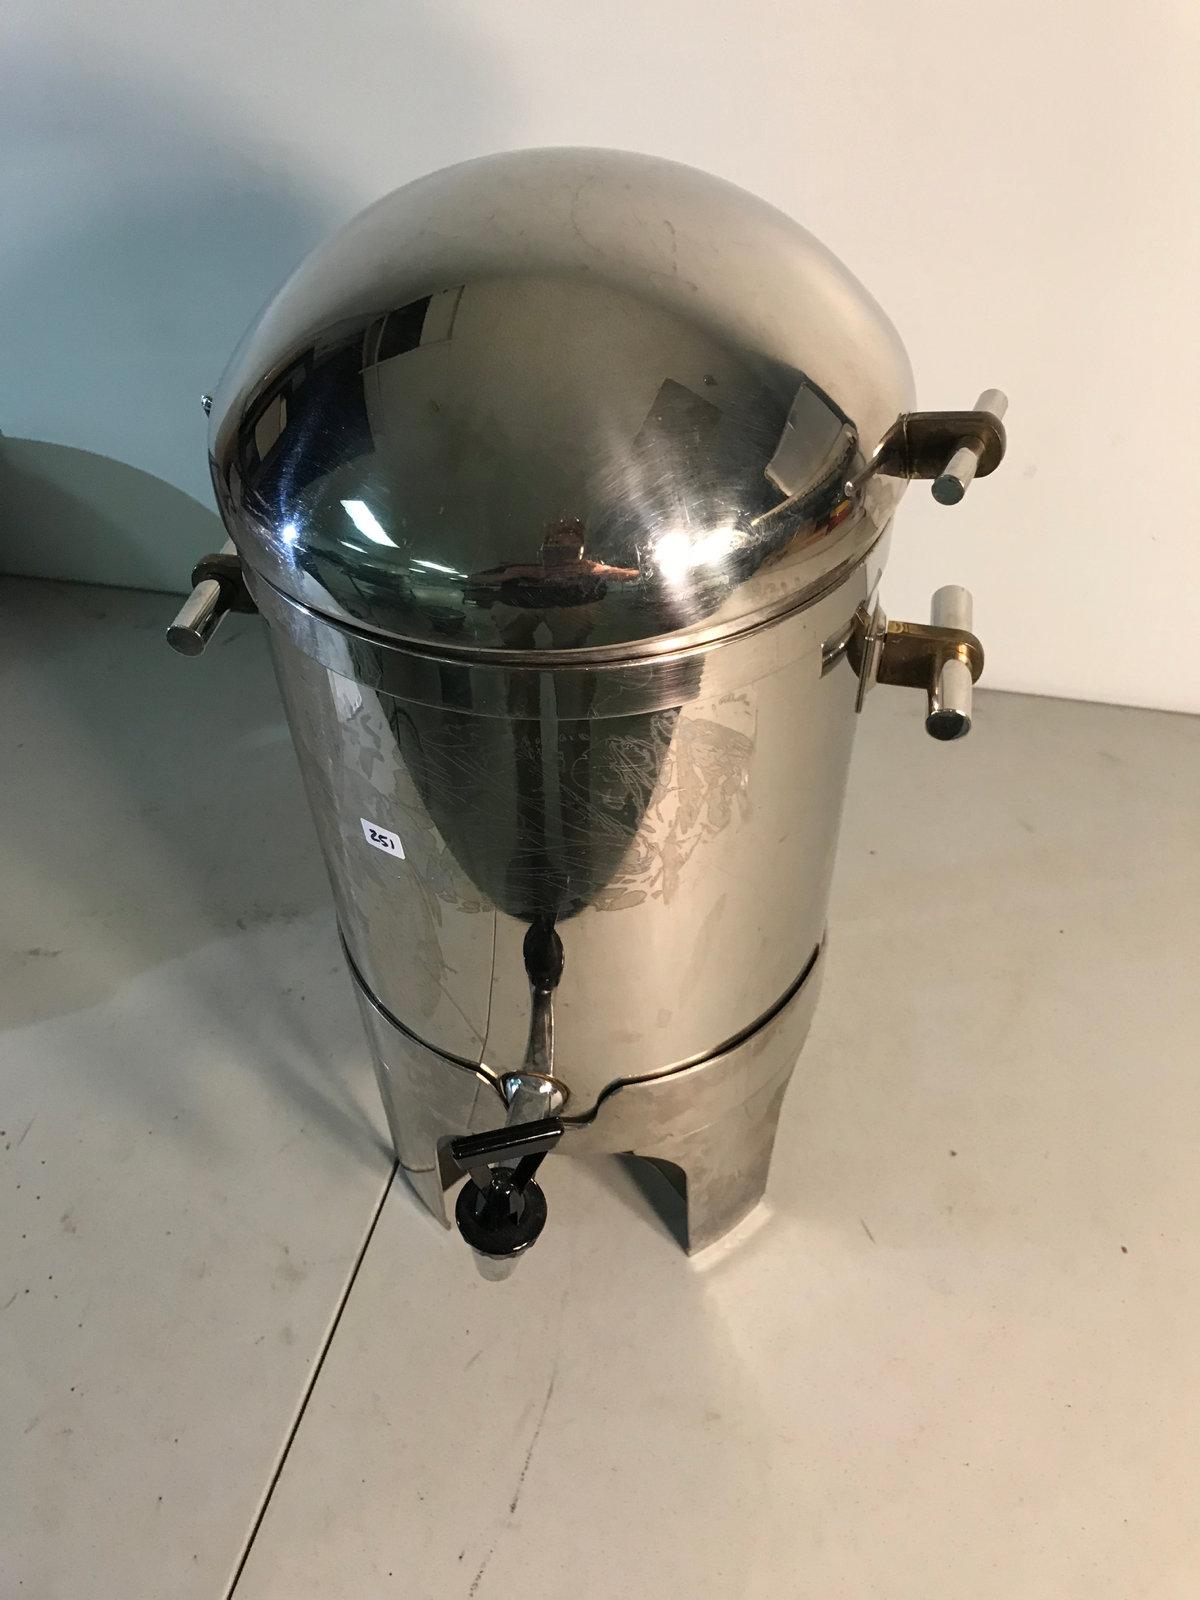 Stainless beverage dispenser, 19 inches tall